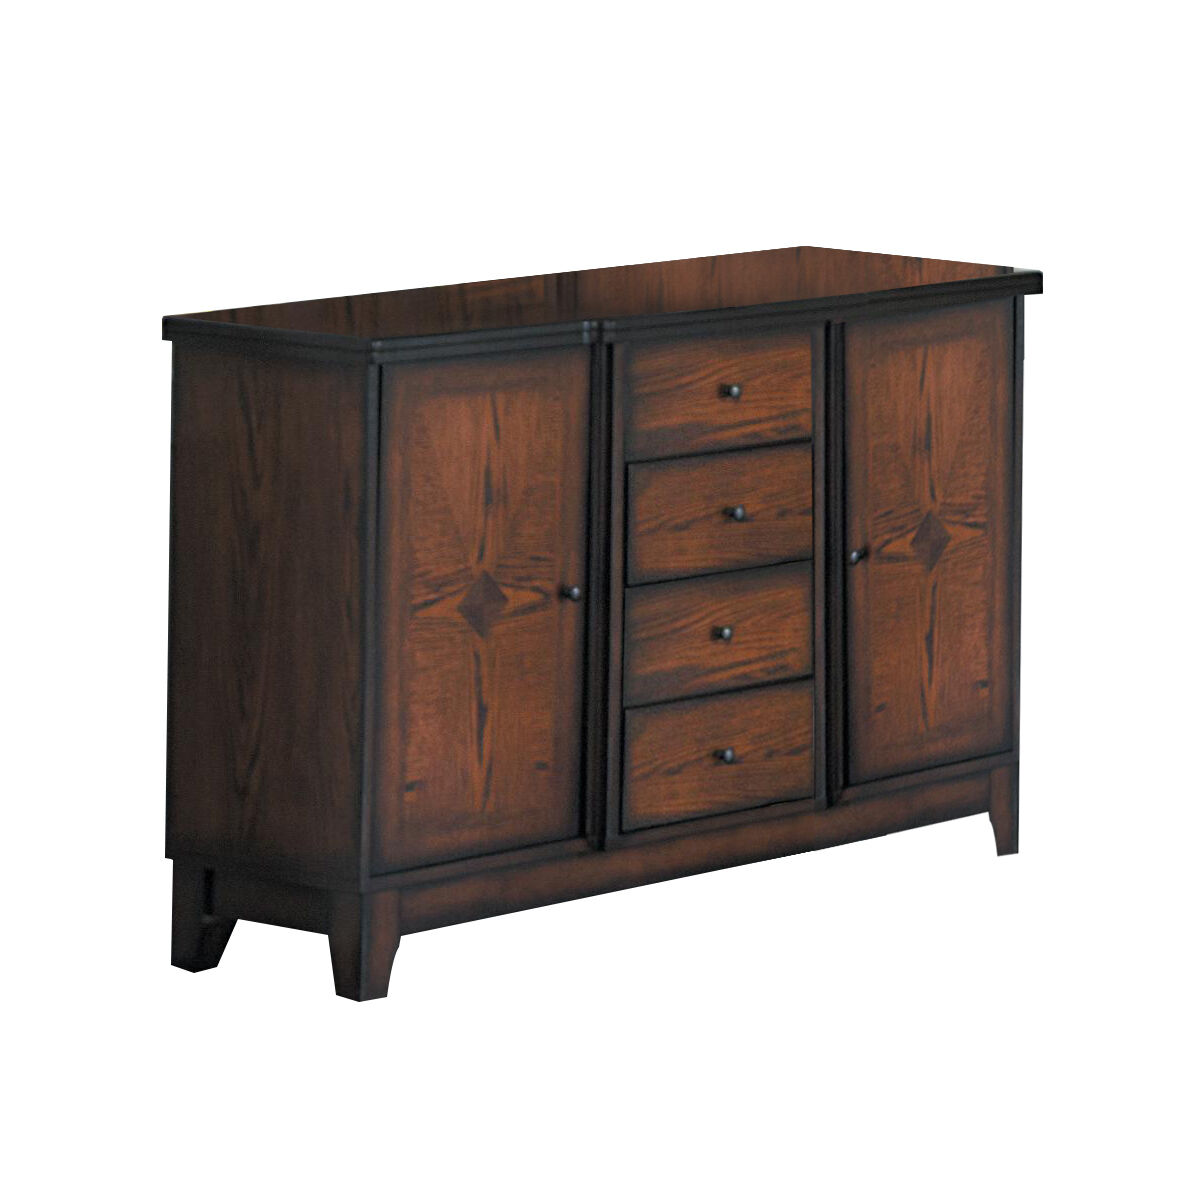 Rustic 4 Drawer Wooden Server with 2 Side Cabinets and Grain Details, Brown